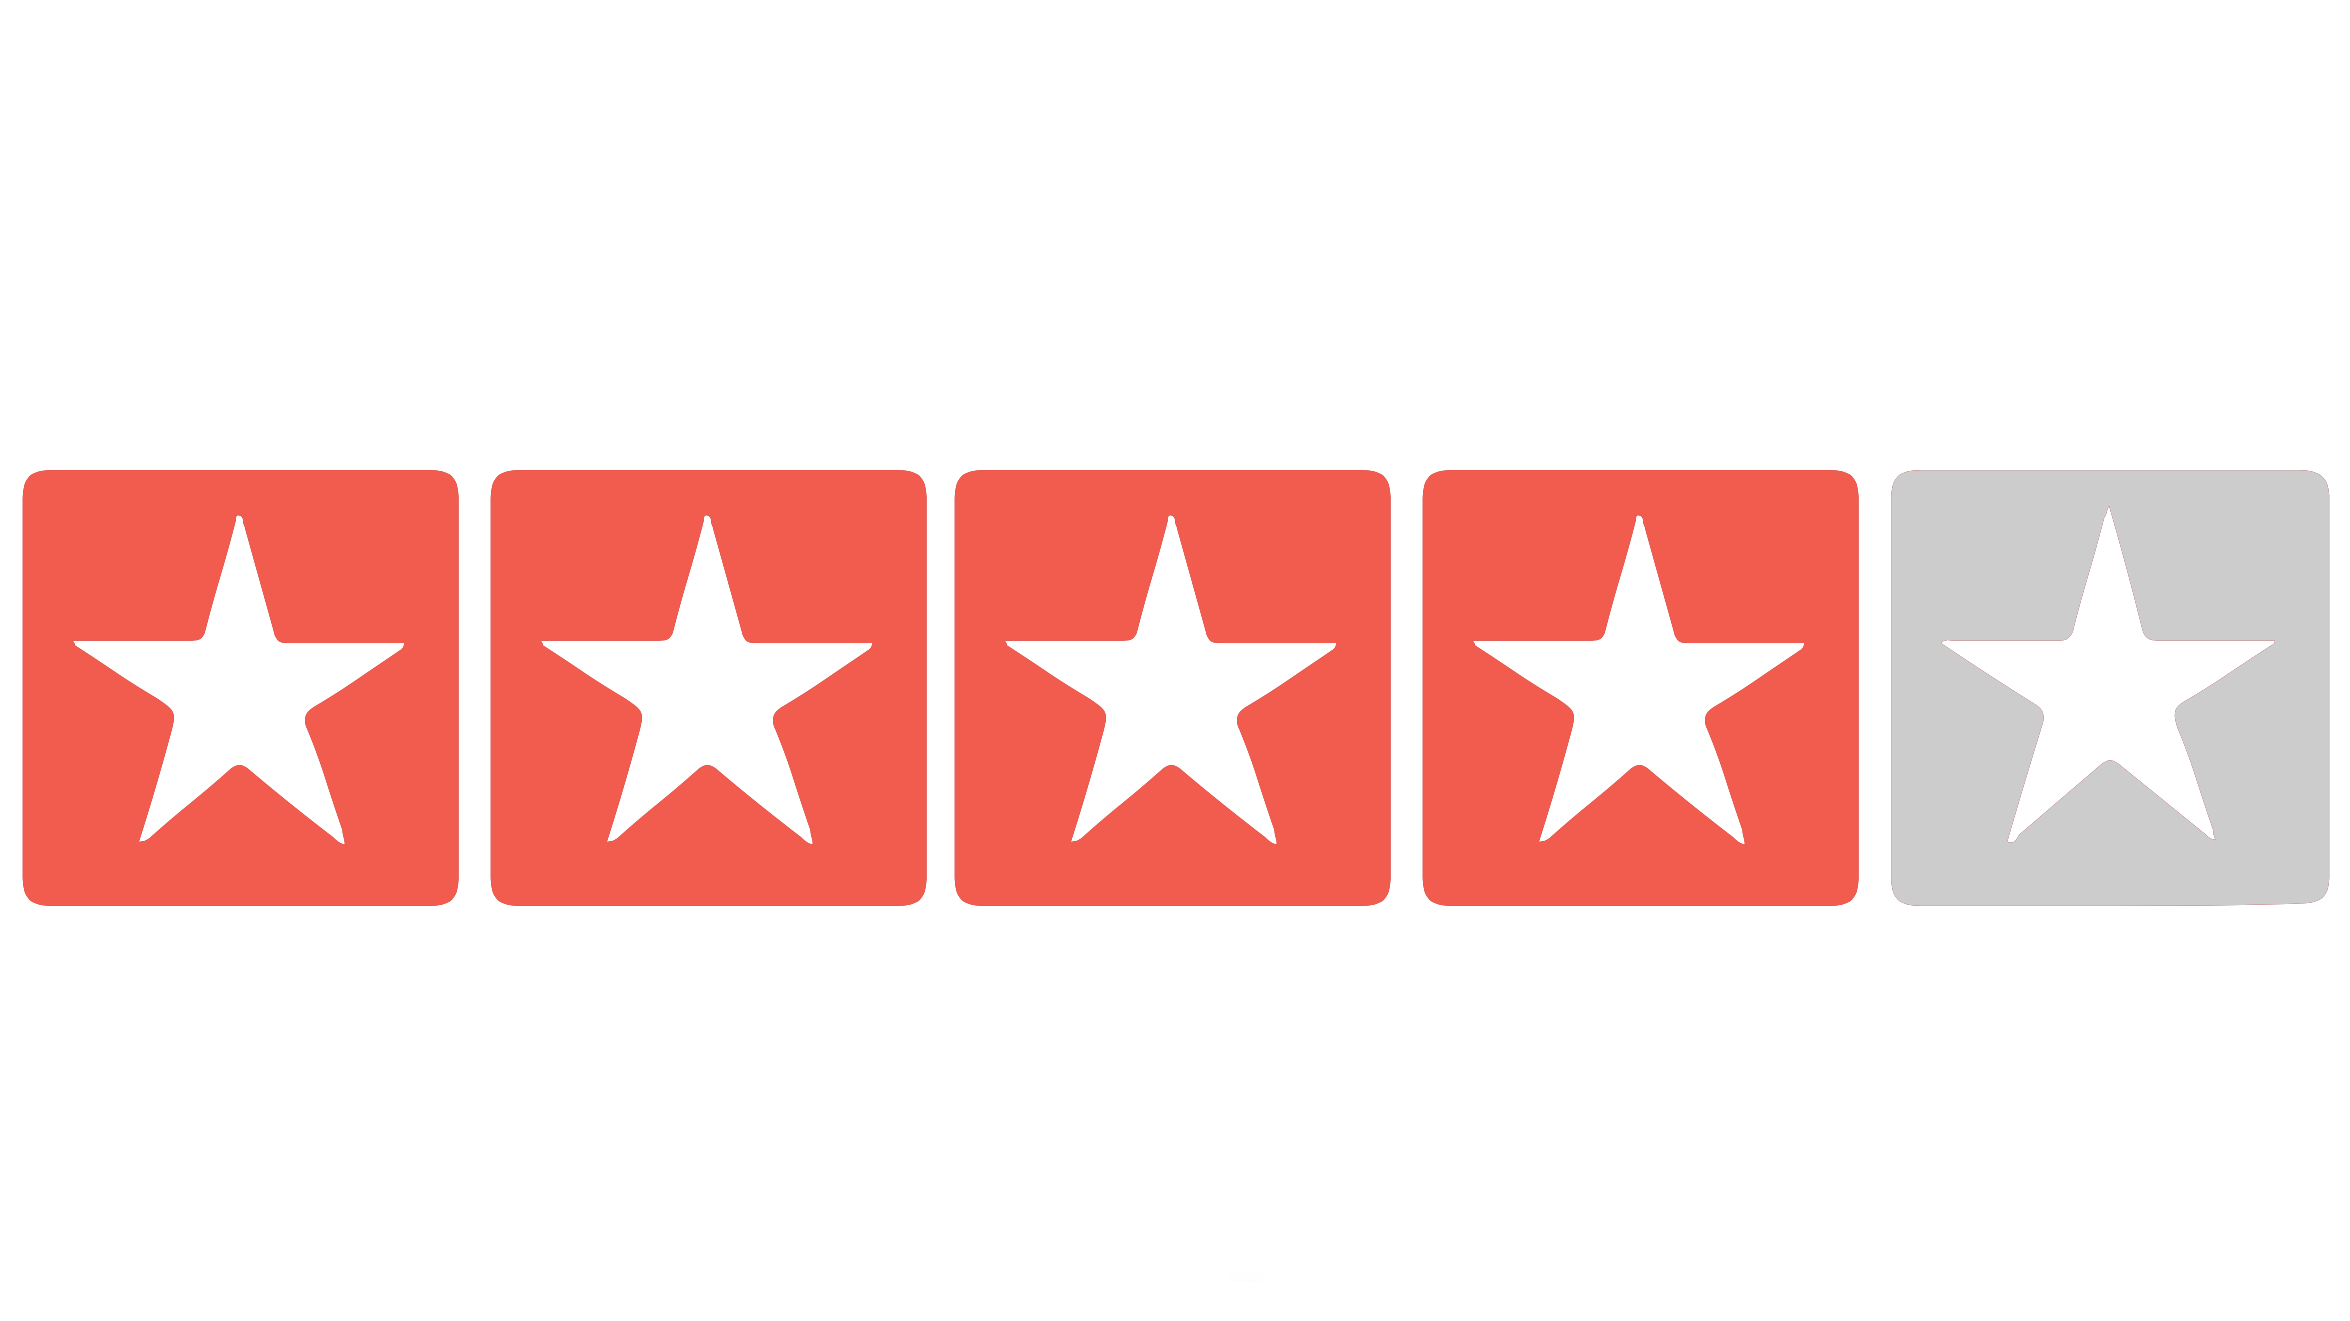 Chris G’s Best Yelp Reviews: The Punchbowl – 4/5 Stars